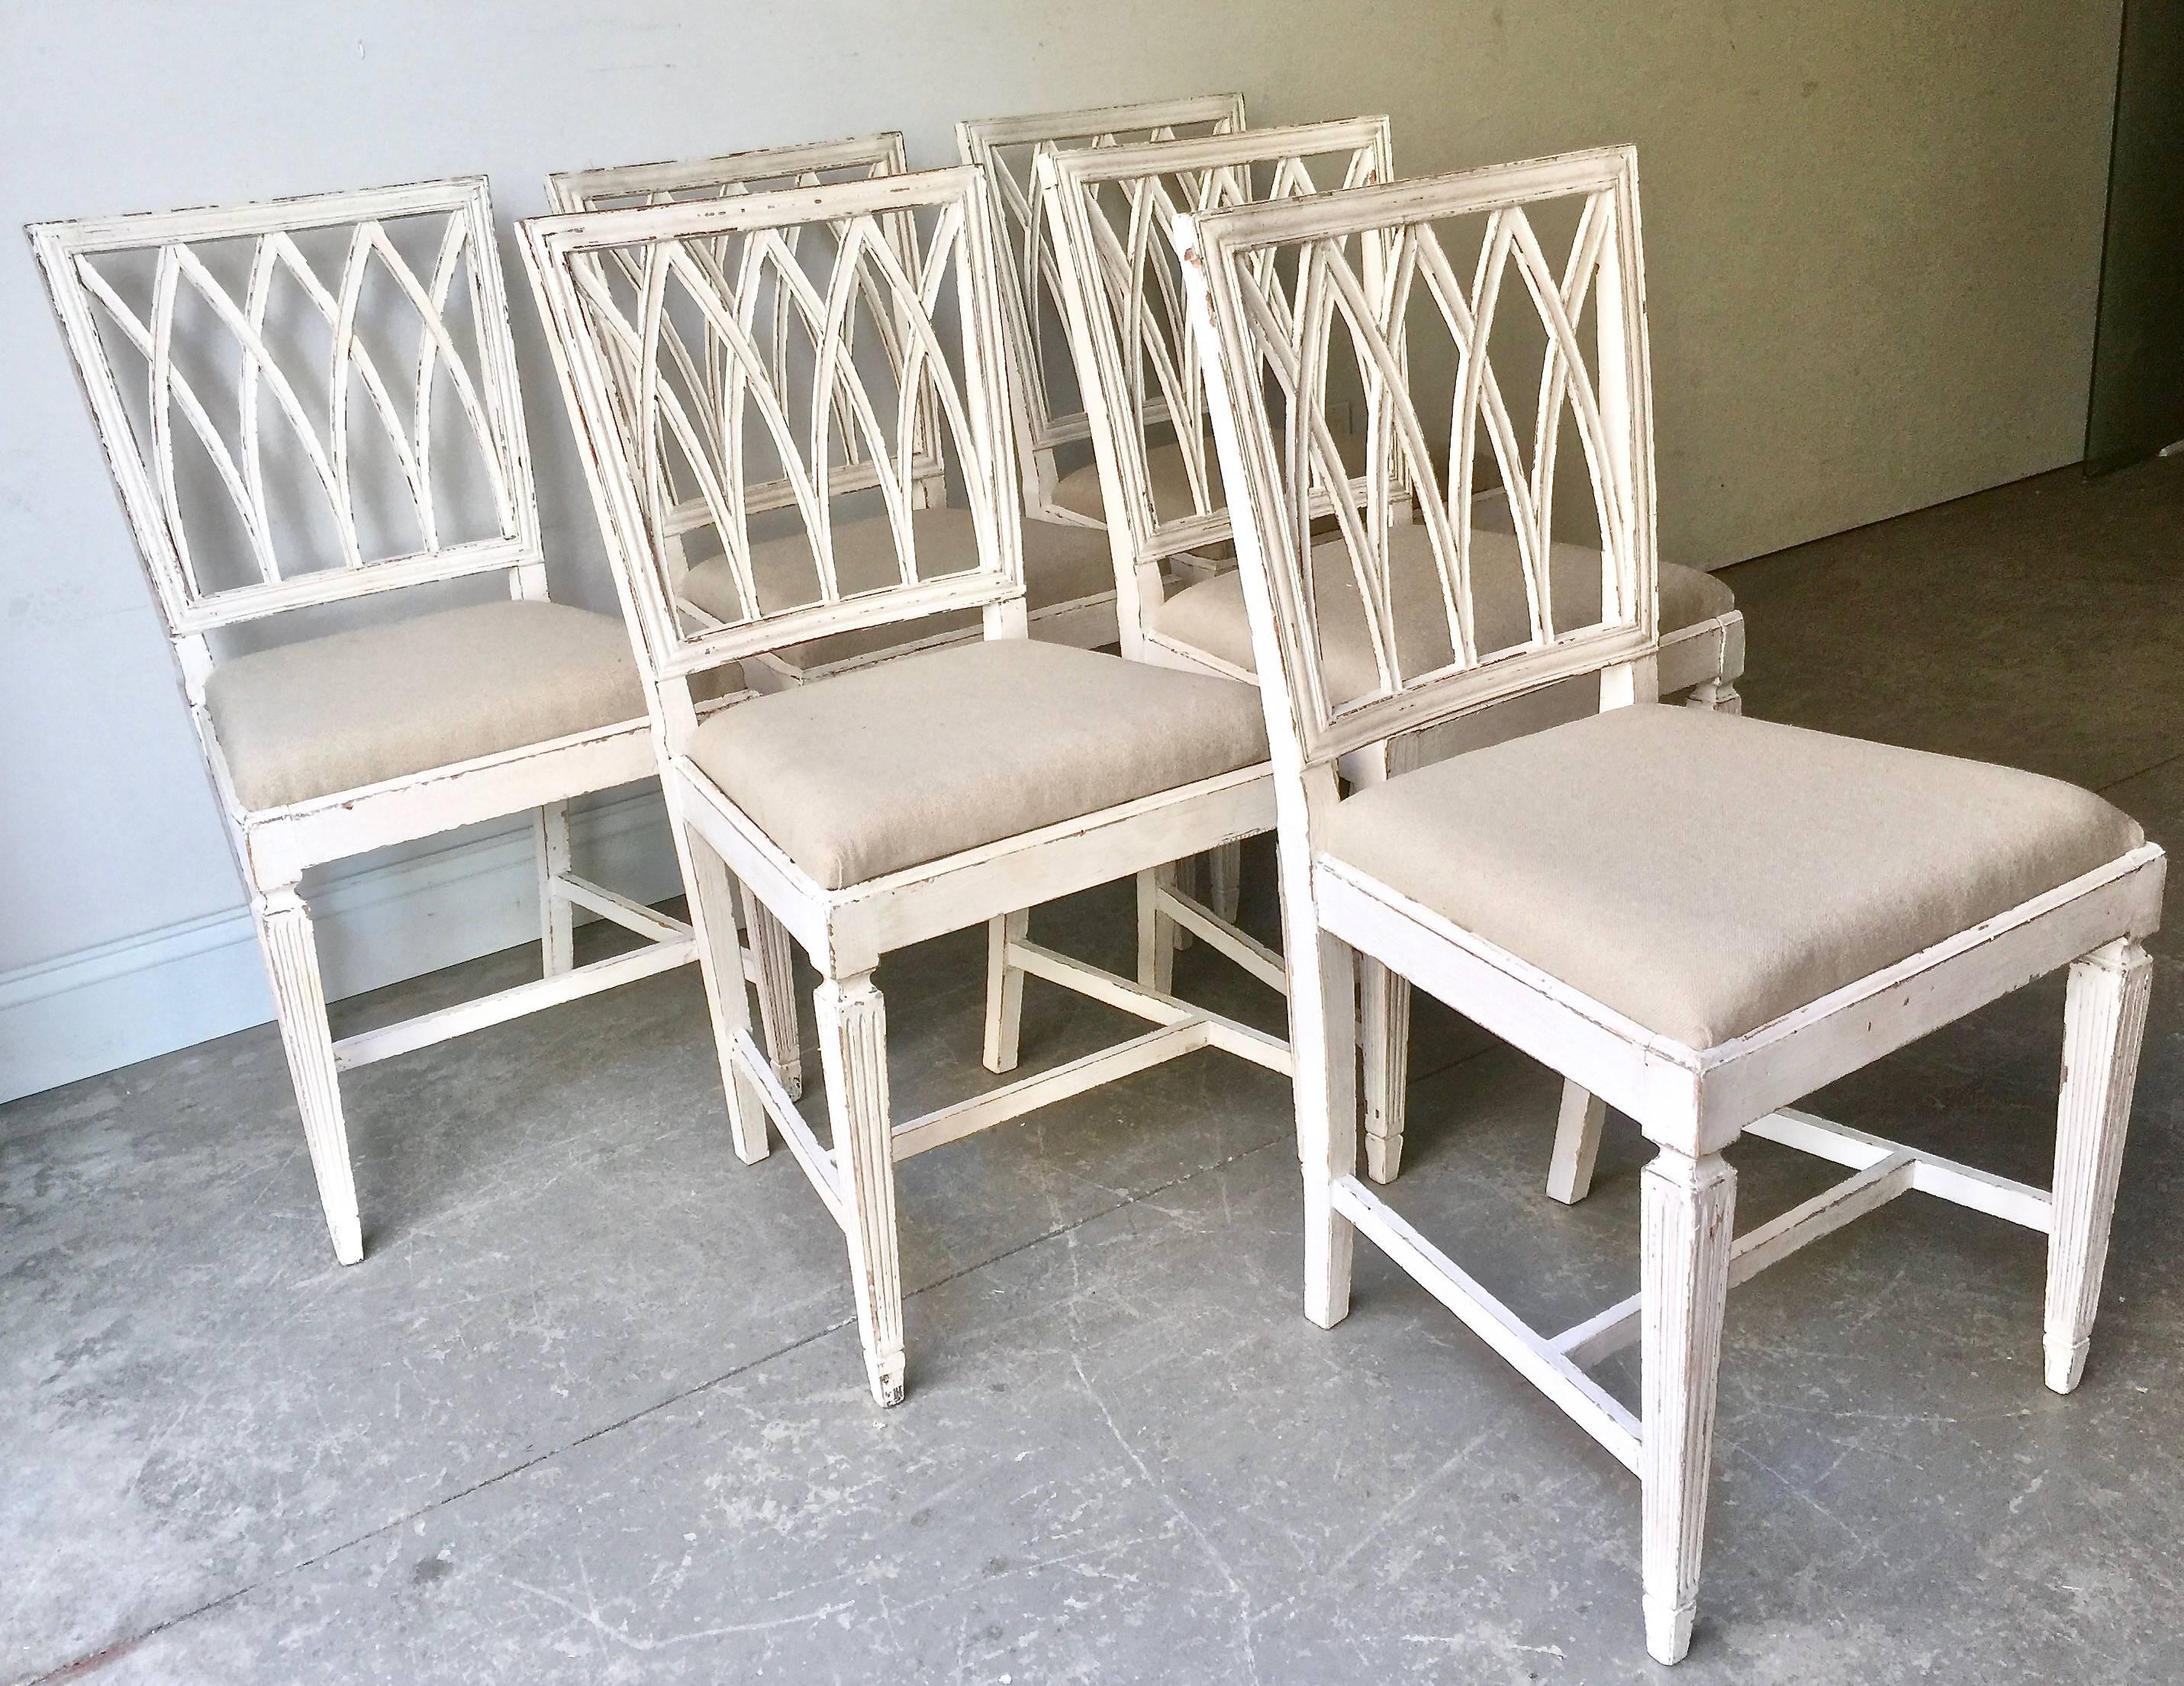 A charming set of six of French late 19th century painted side chairs with richly carved open lattice backs, loose upholstered seats in linen and fluted tapered legs with H-stretchers in time worn cream-white patina. France, 19th